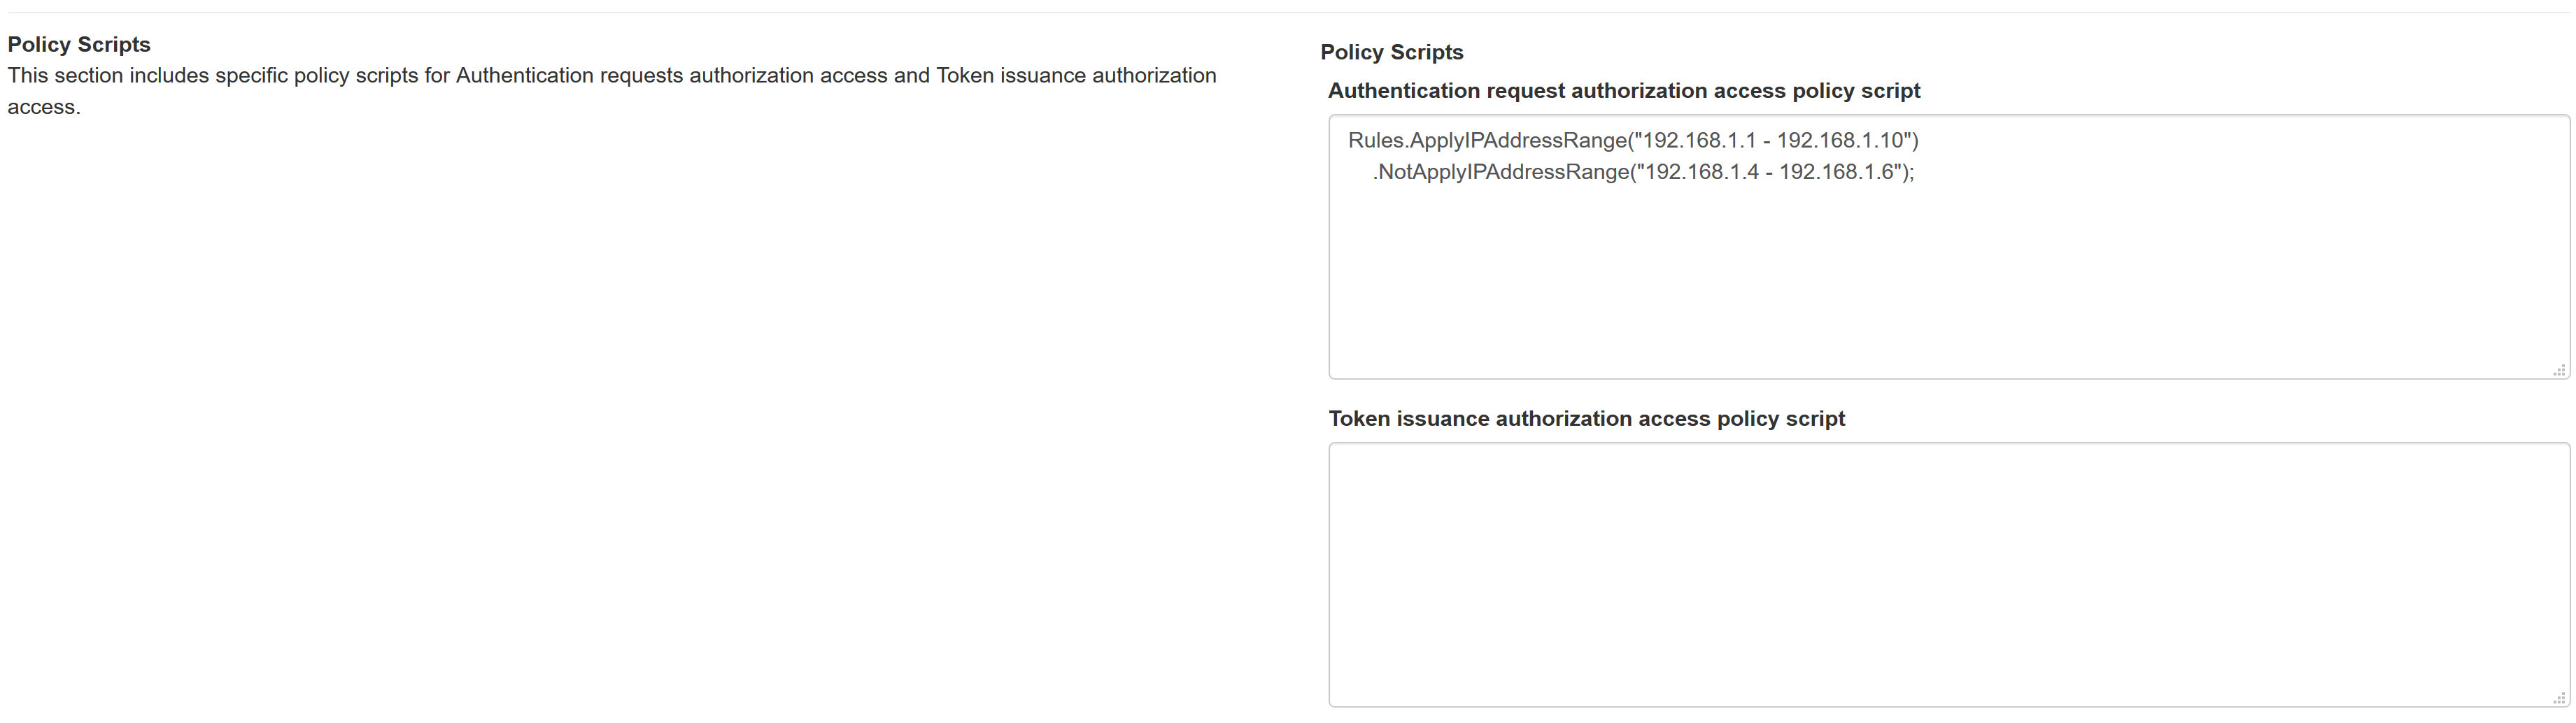 authentication requests and Token issuance access policy scripts